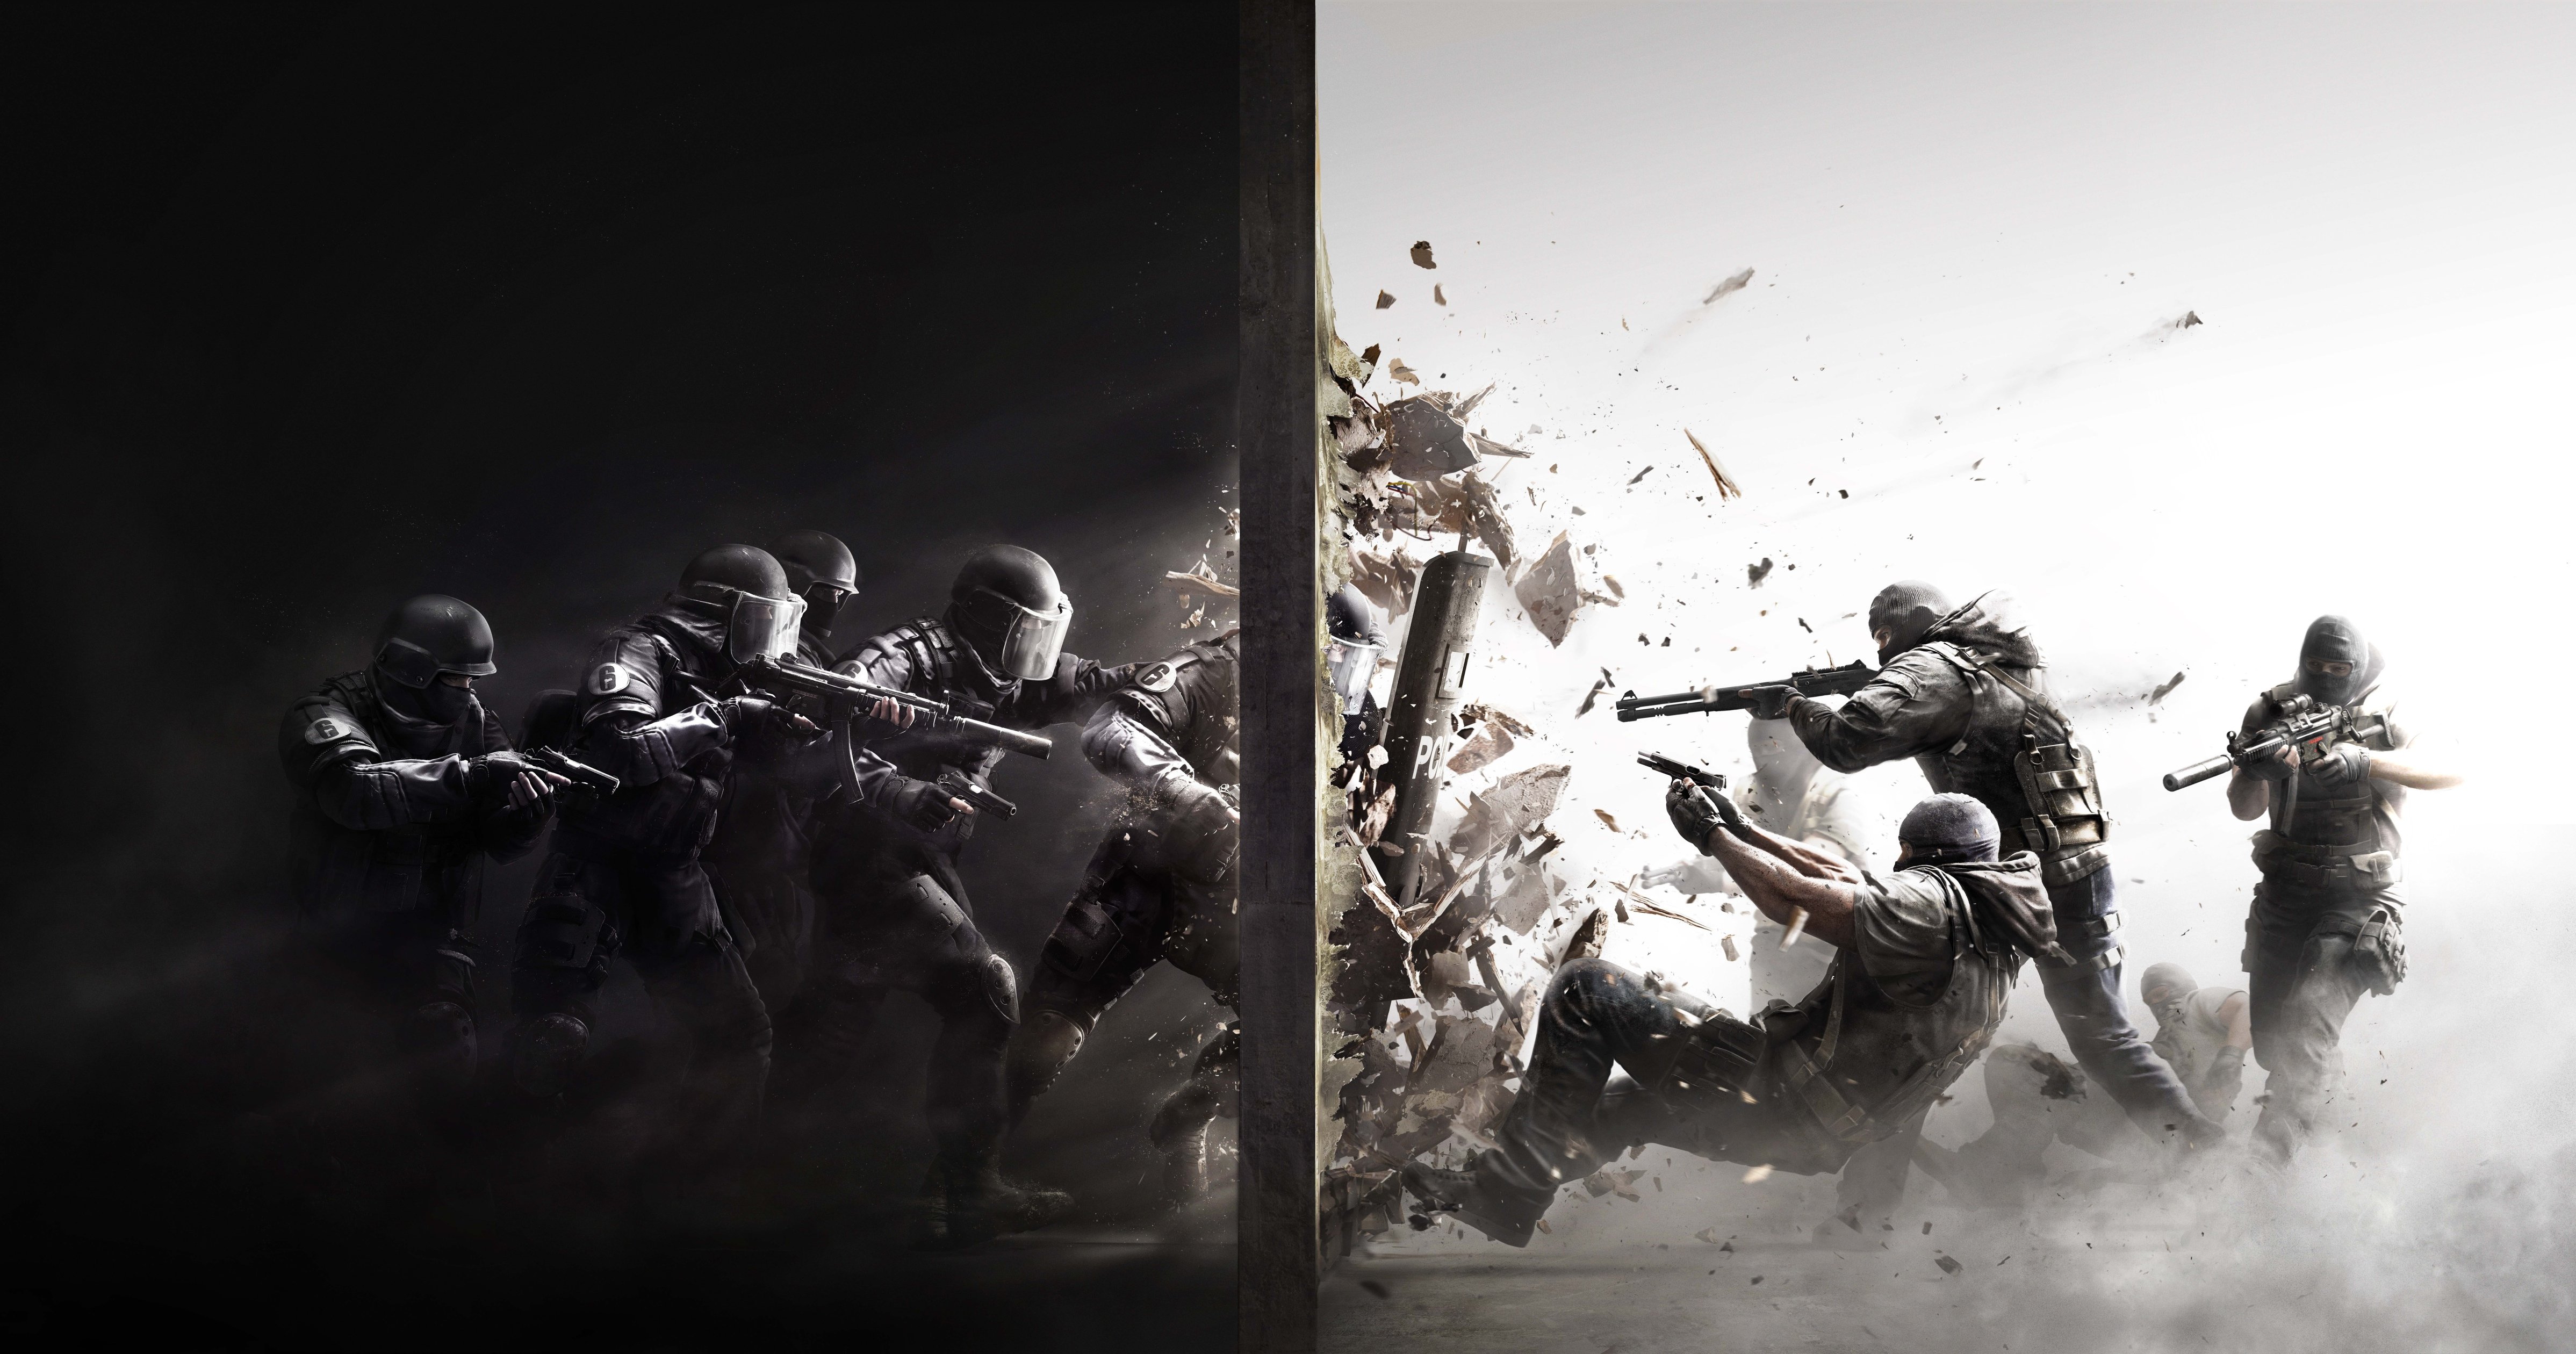 tom, Clancys, Rainbow, Six, Siege, Action, Shooter, Military, Fighting, War, 1tcrss Wallpaper